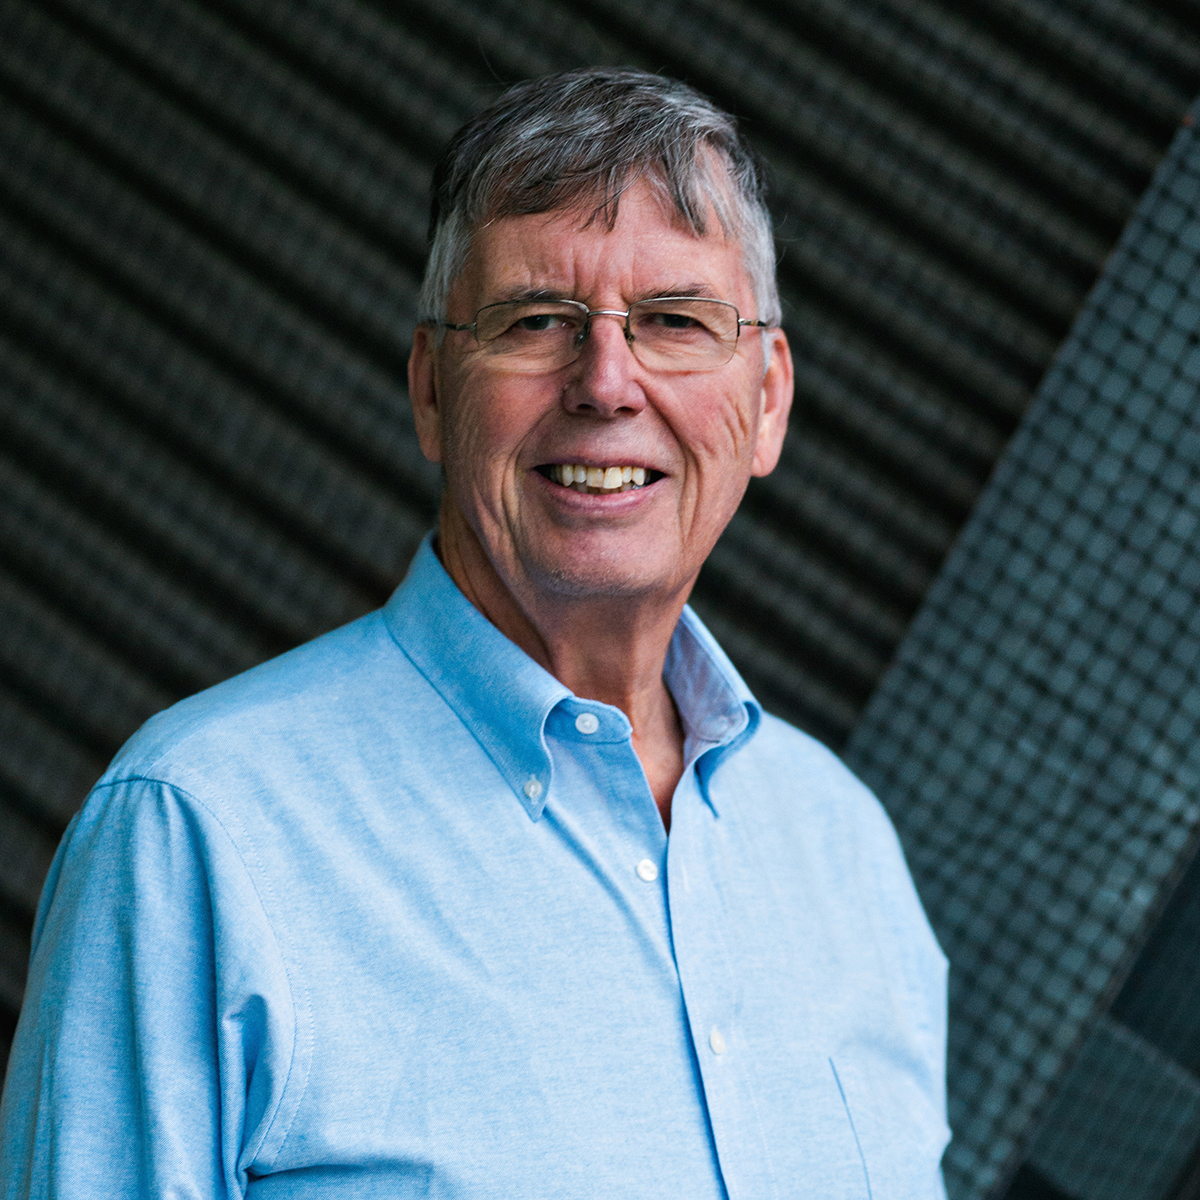 Feb 1: Dr. Mike Stonebraker presents 'DBOS: a database oriented operating system.' Learn how cloud app dev will be made simpler & more secure running on a distributed OS built for #cloudnative. Watch online: acm-org.zoom.us/webinar/regist… @TheOfficialACM